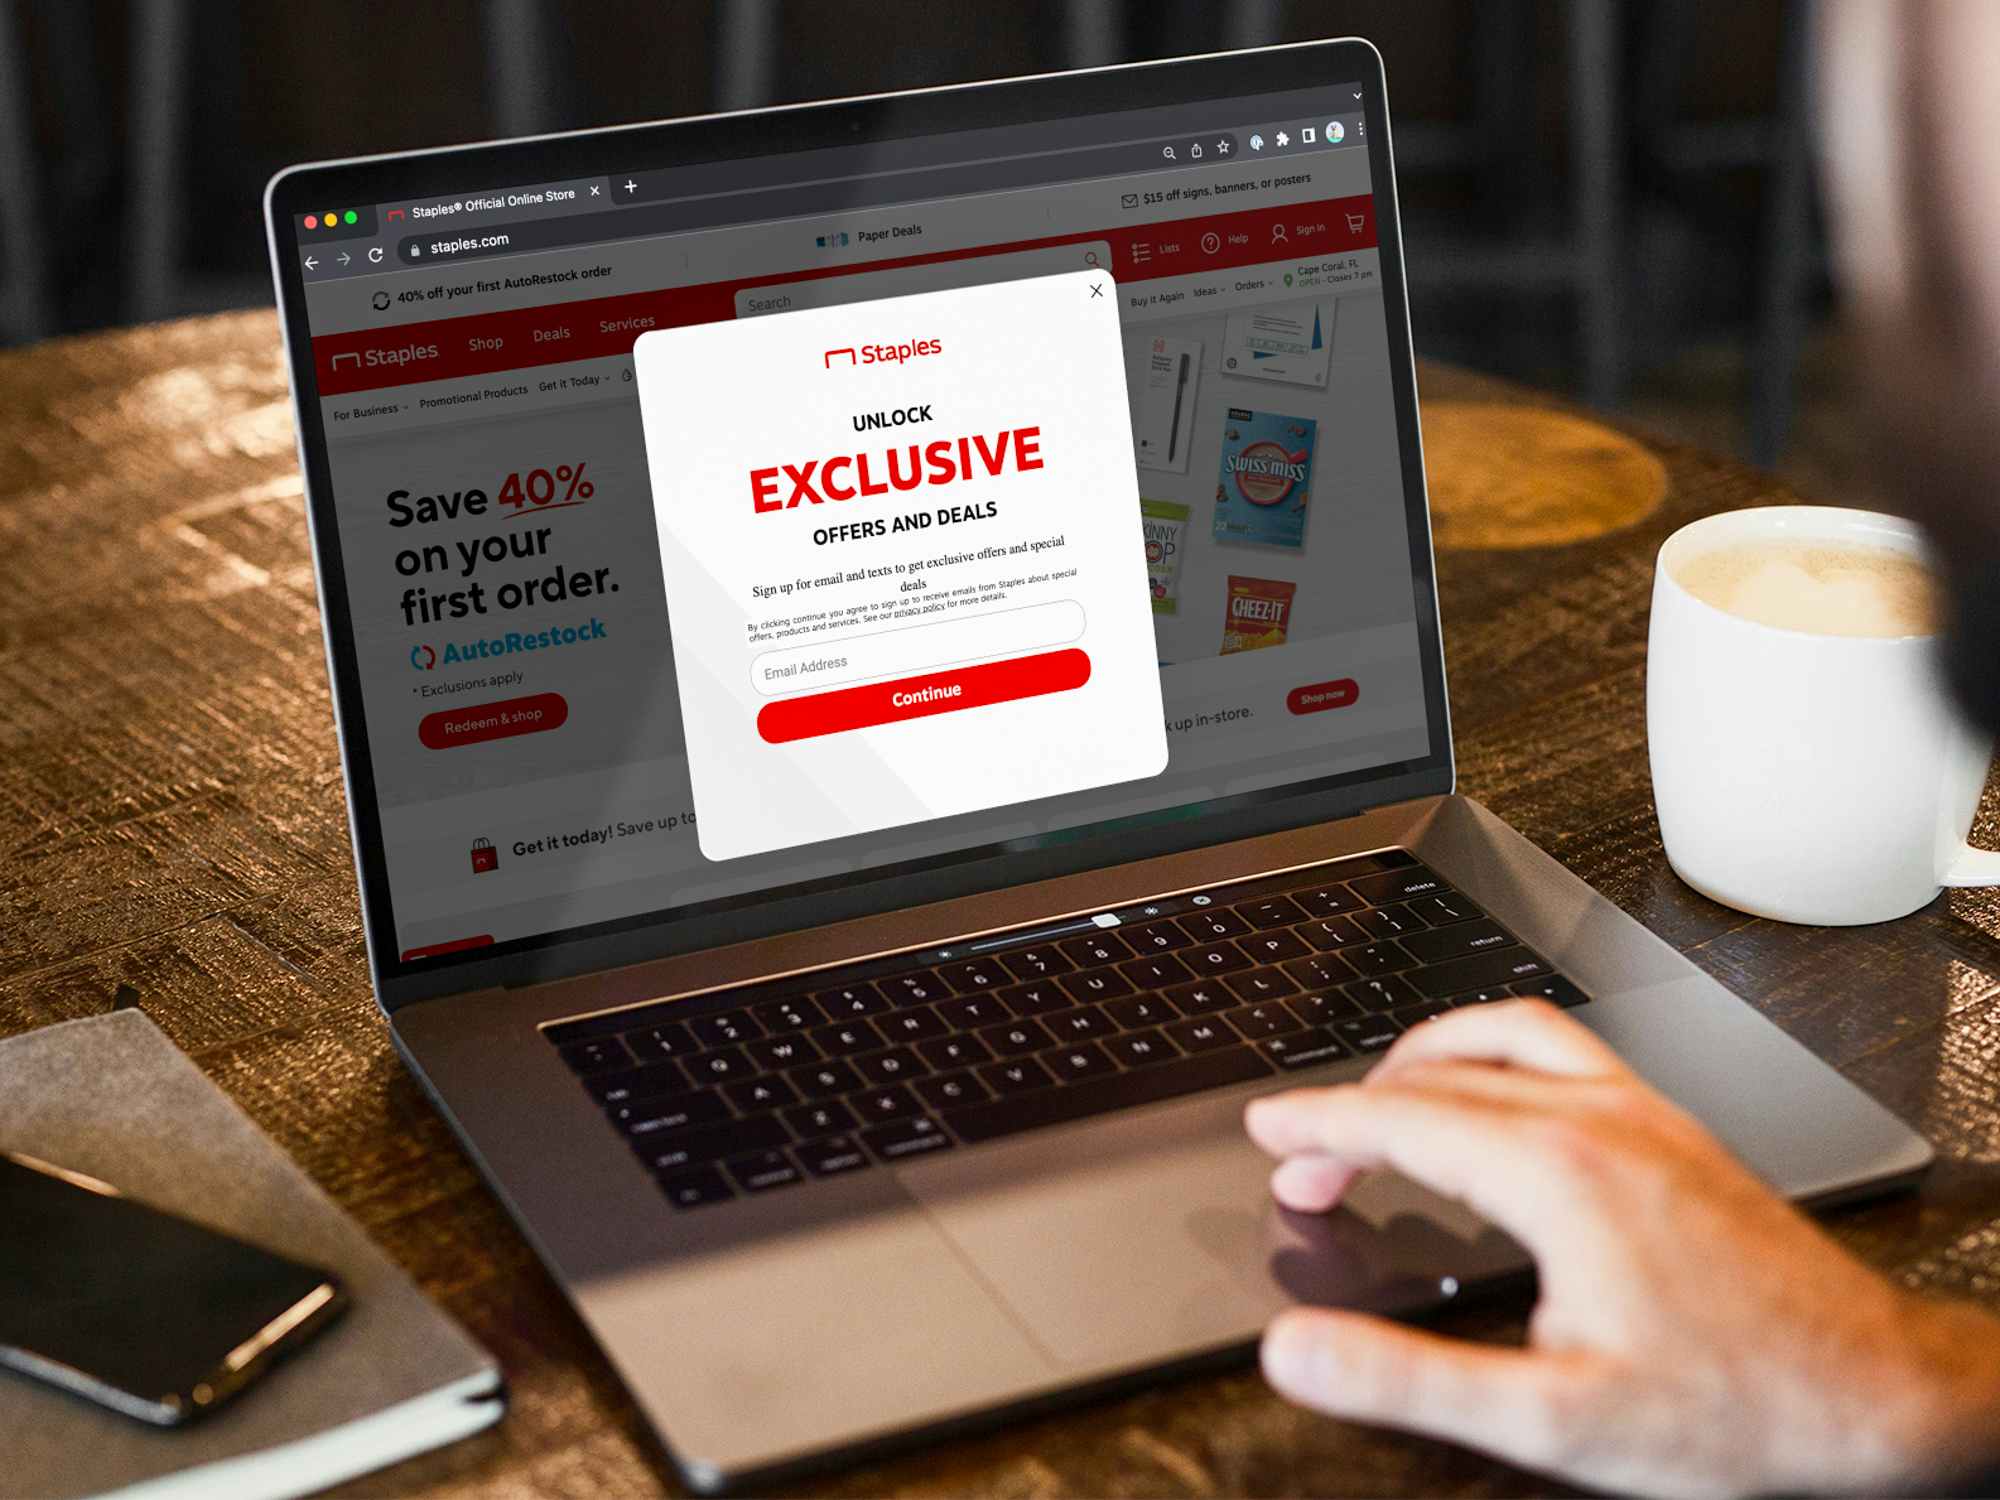 Someone signing up for email offers on Staples.com